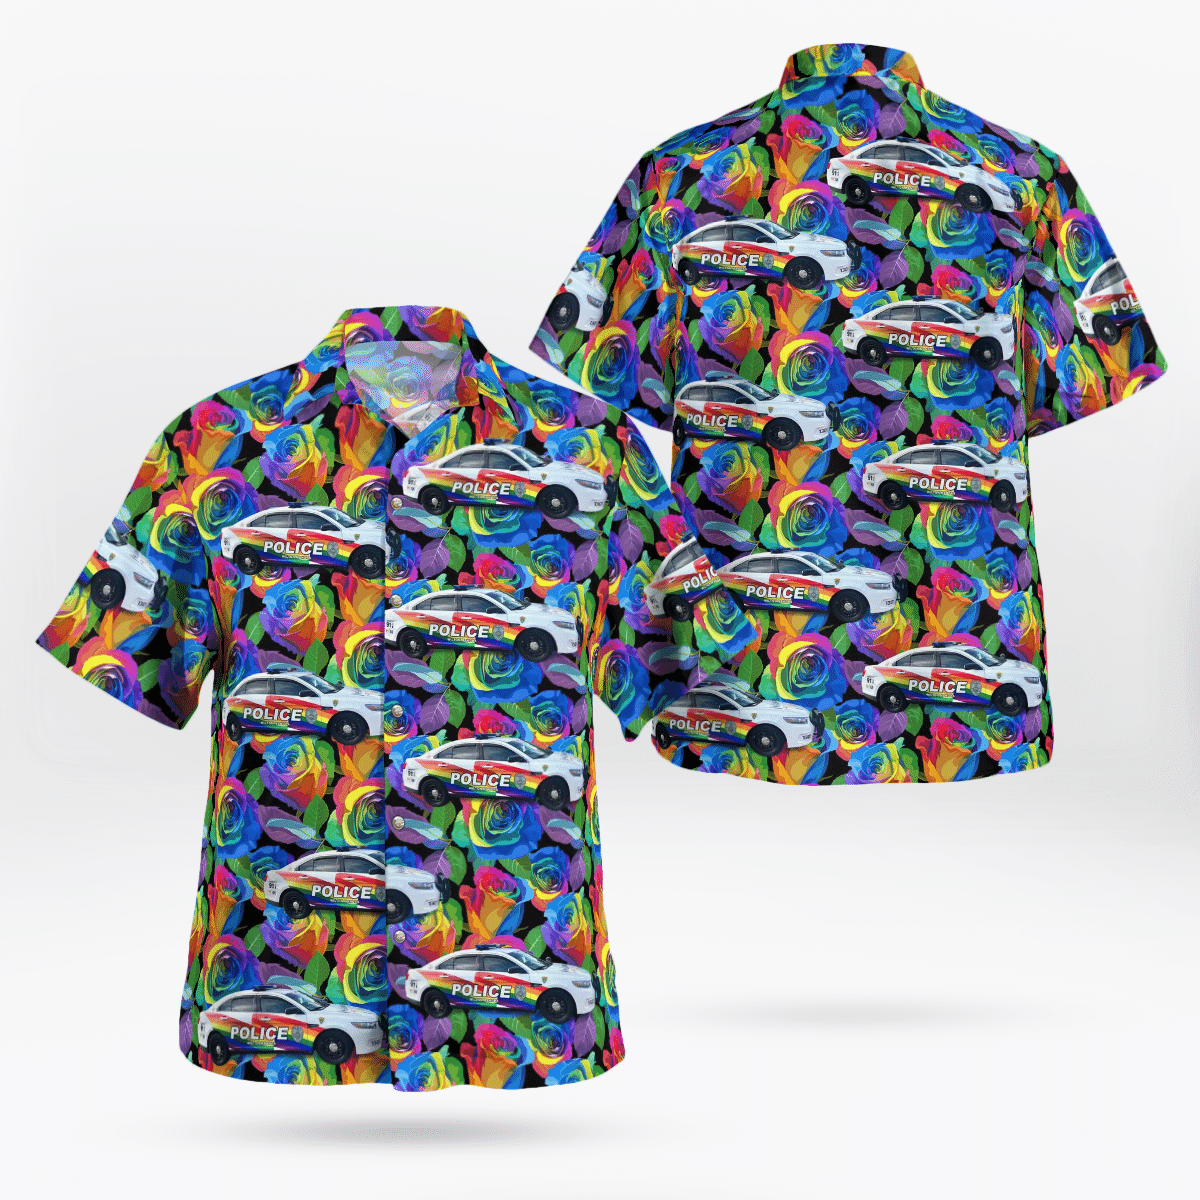 If you are in need of a new summertime look, pick up this Hawaiian shirt 51